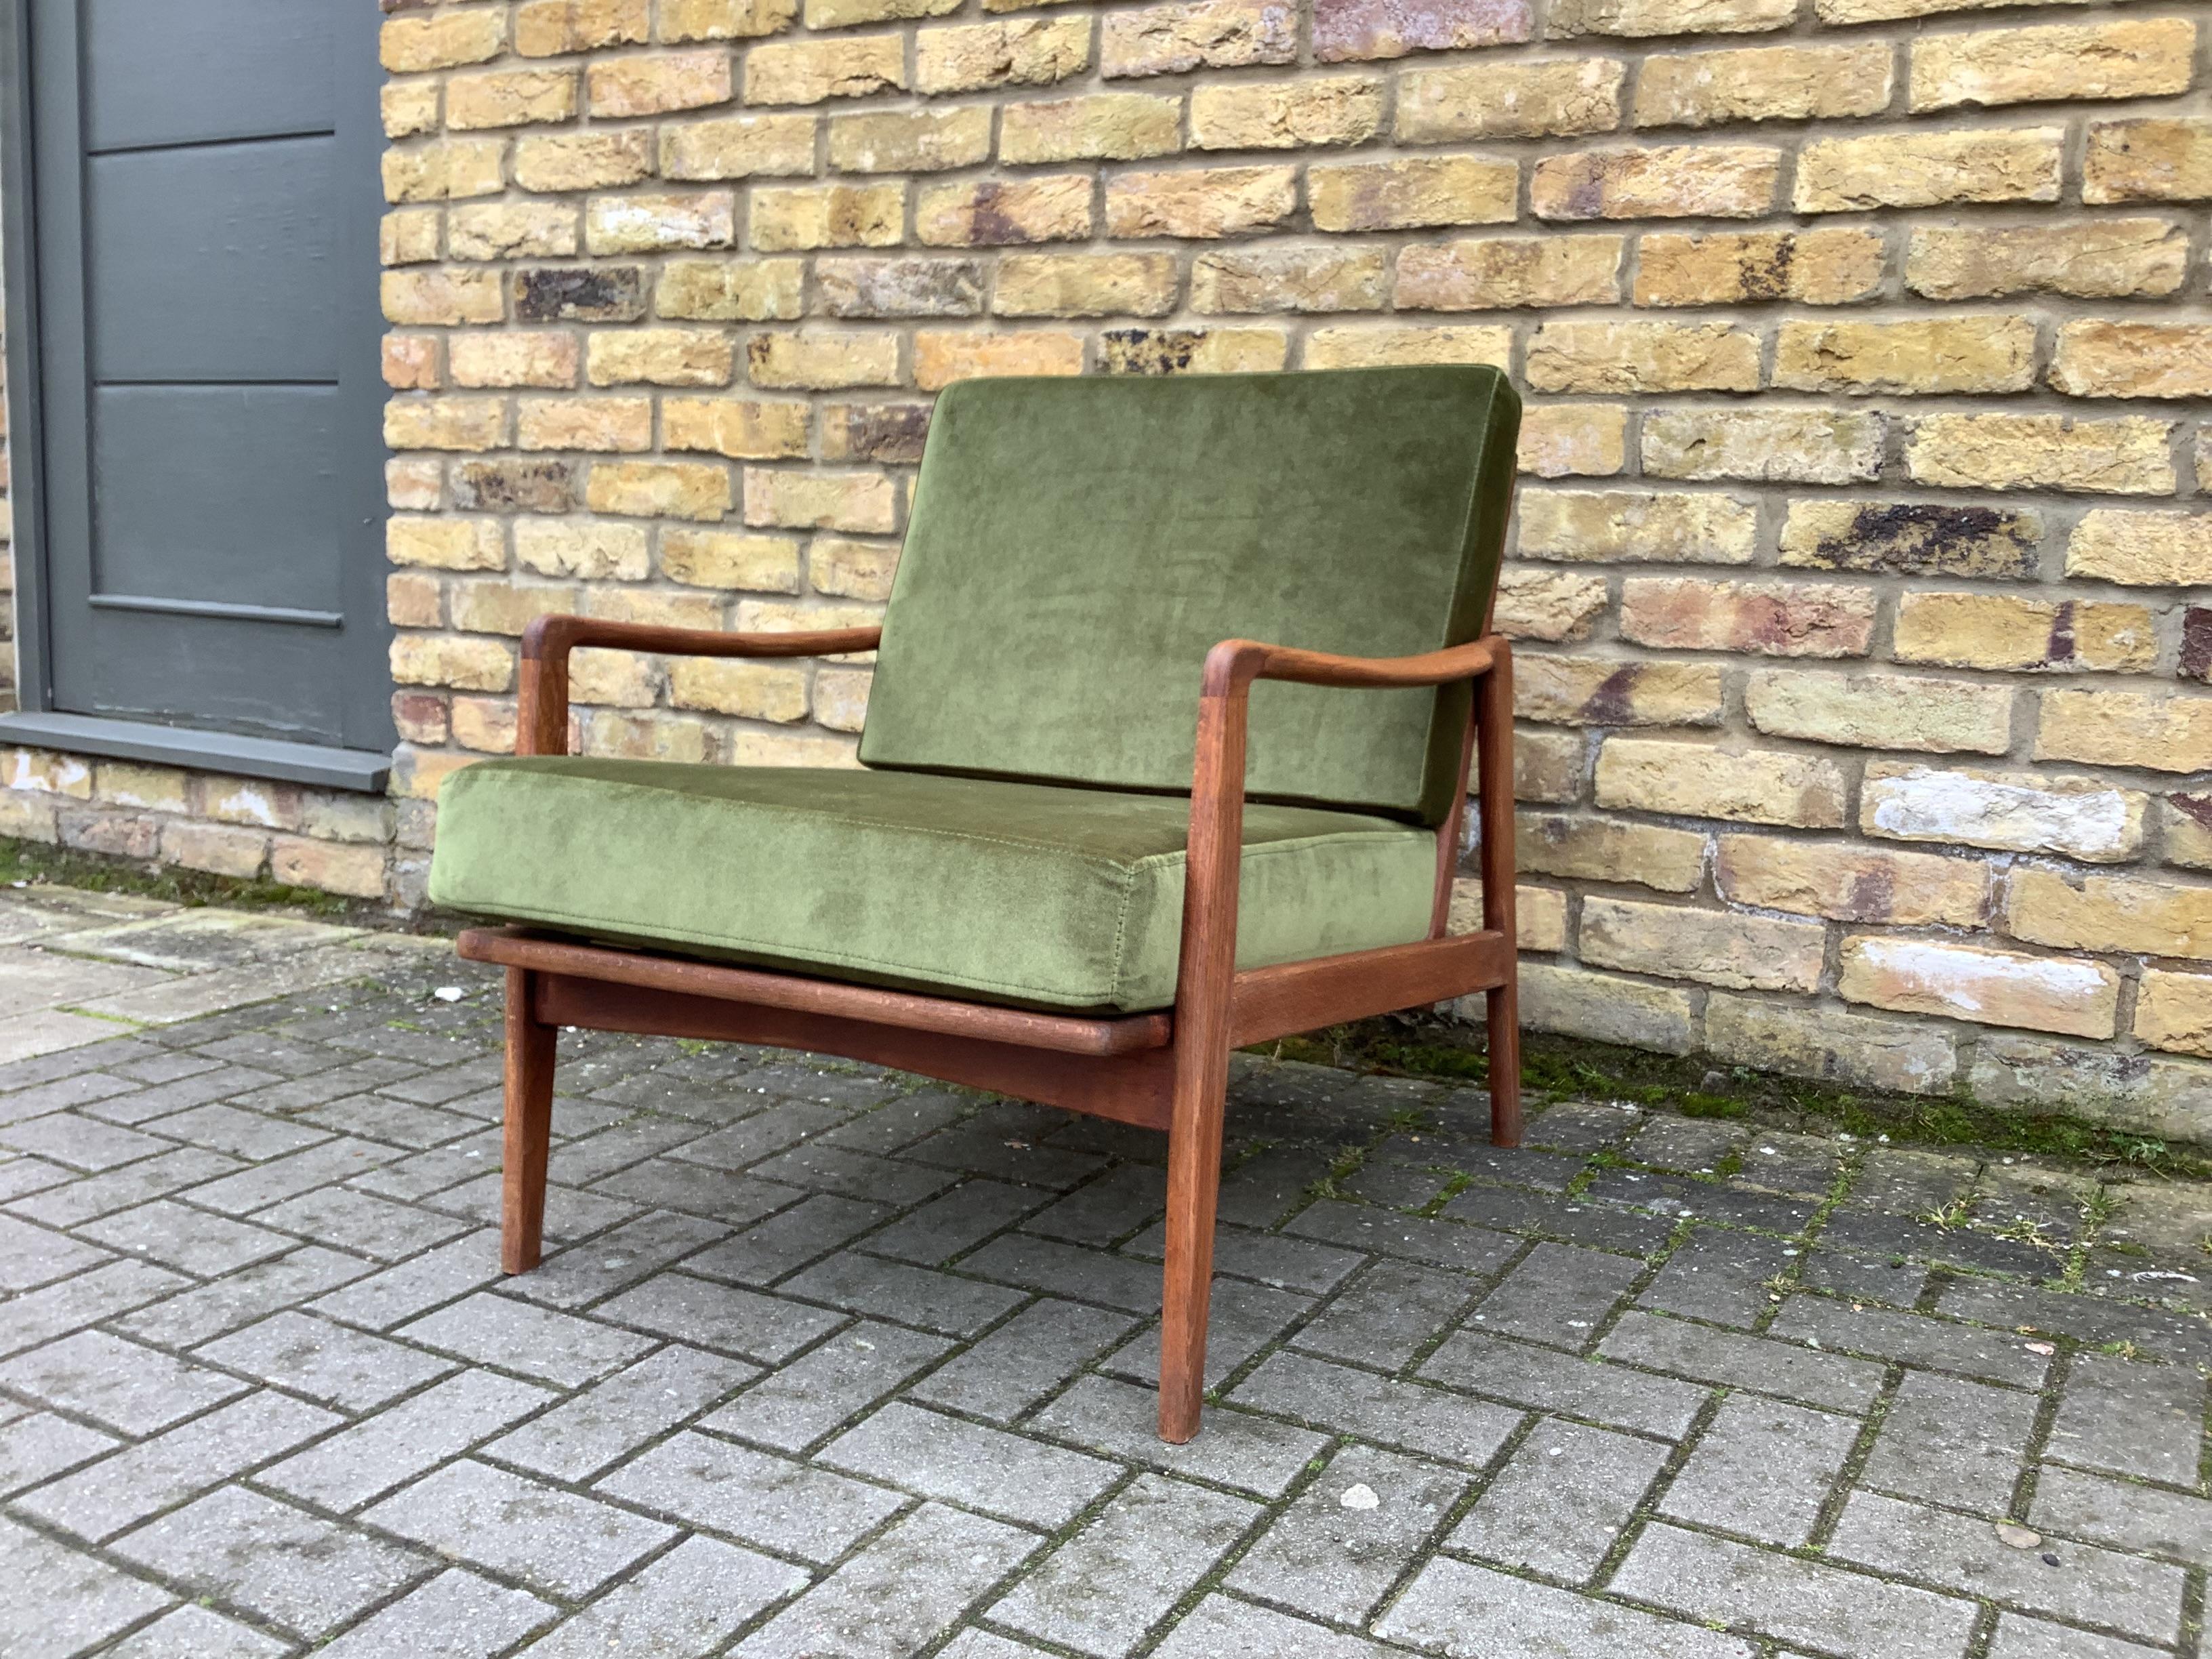 1960;s Danish armchair reupholstered cushions and new webbing
makes for a comfortable armchair with a classic 60's mid century modern
Scandinavian design